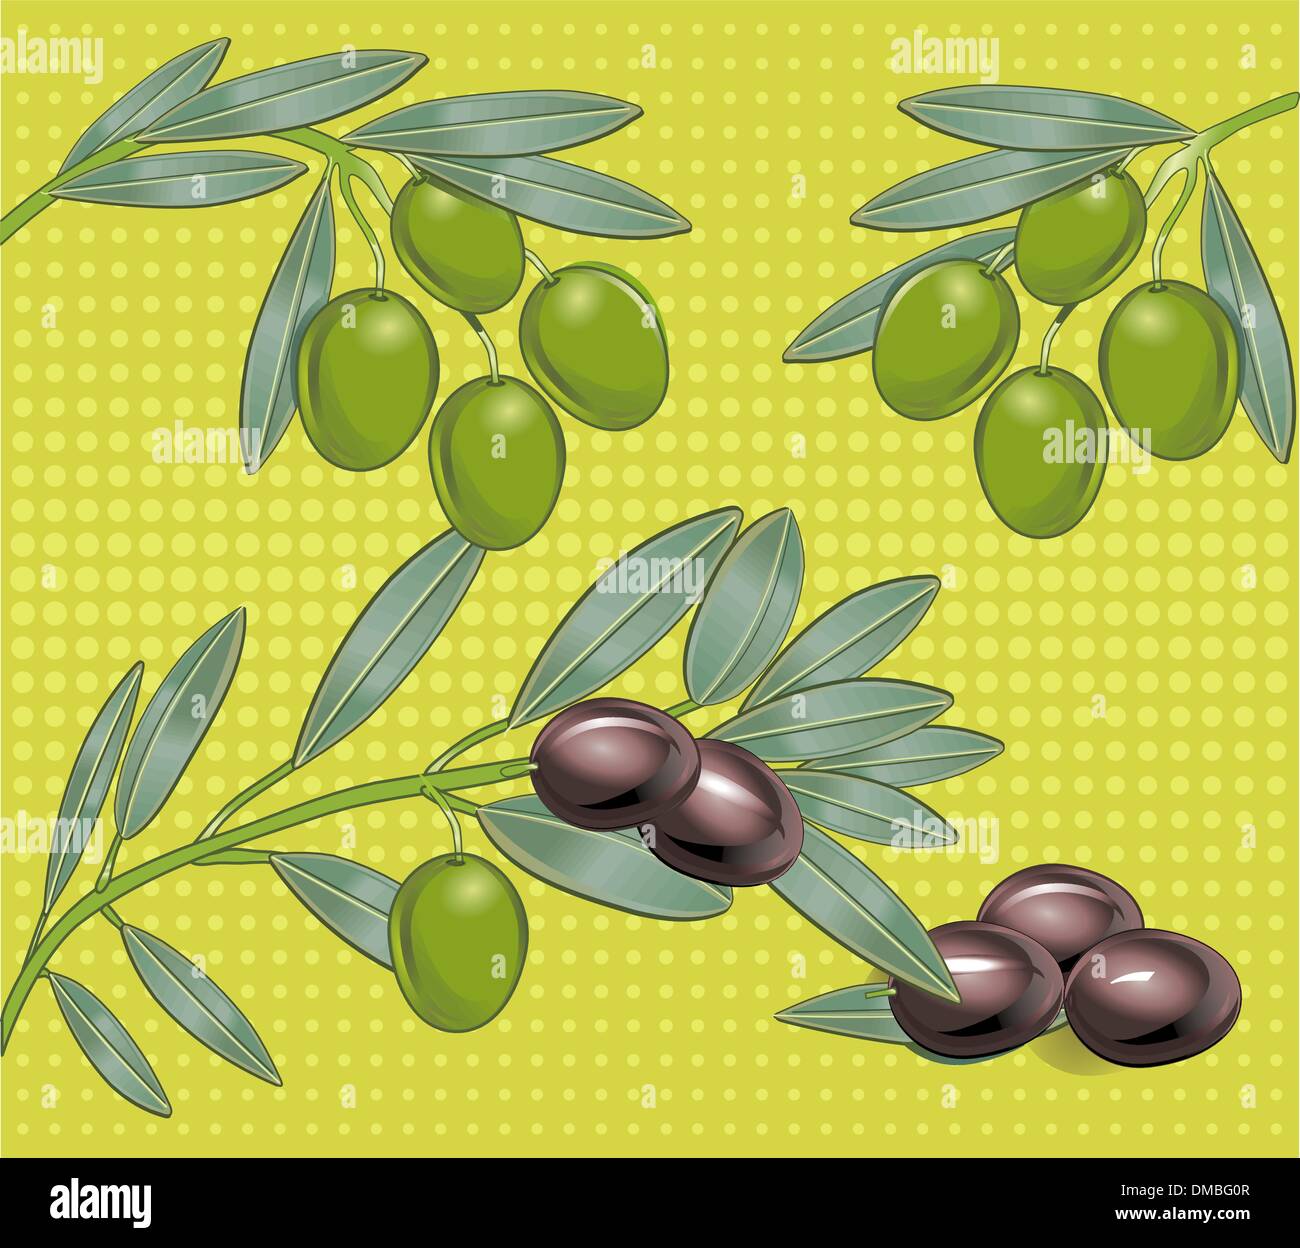 Olives Stock Vector